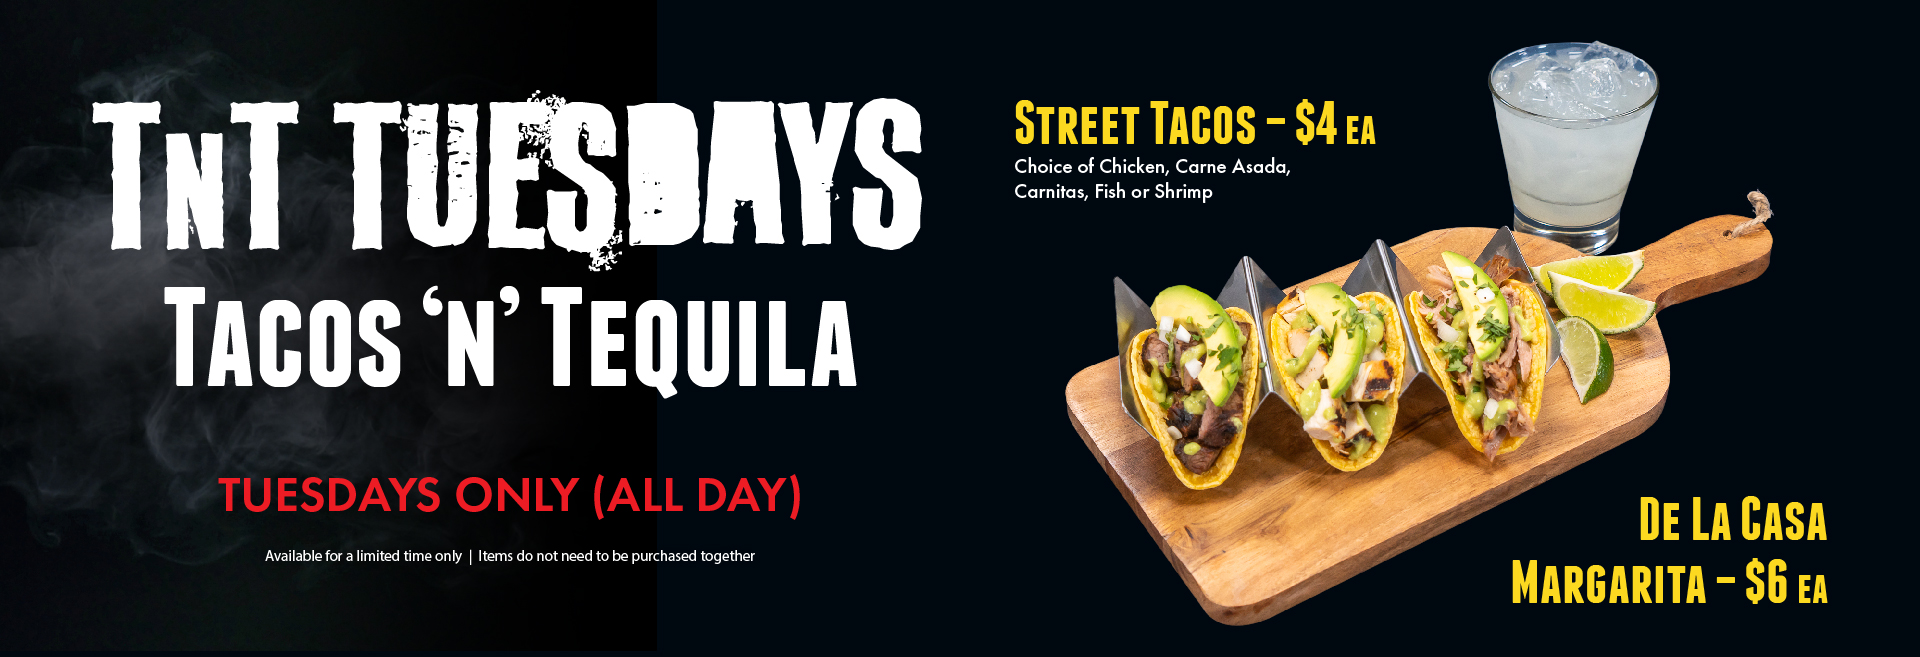 TnT Tuesdays - Tacos and Tequila Special Every Tuesday